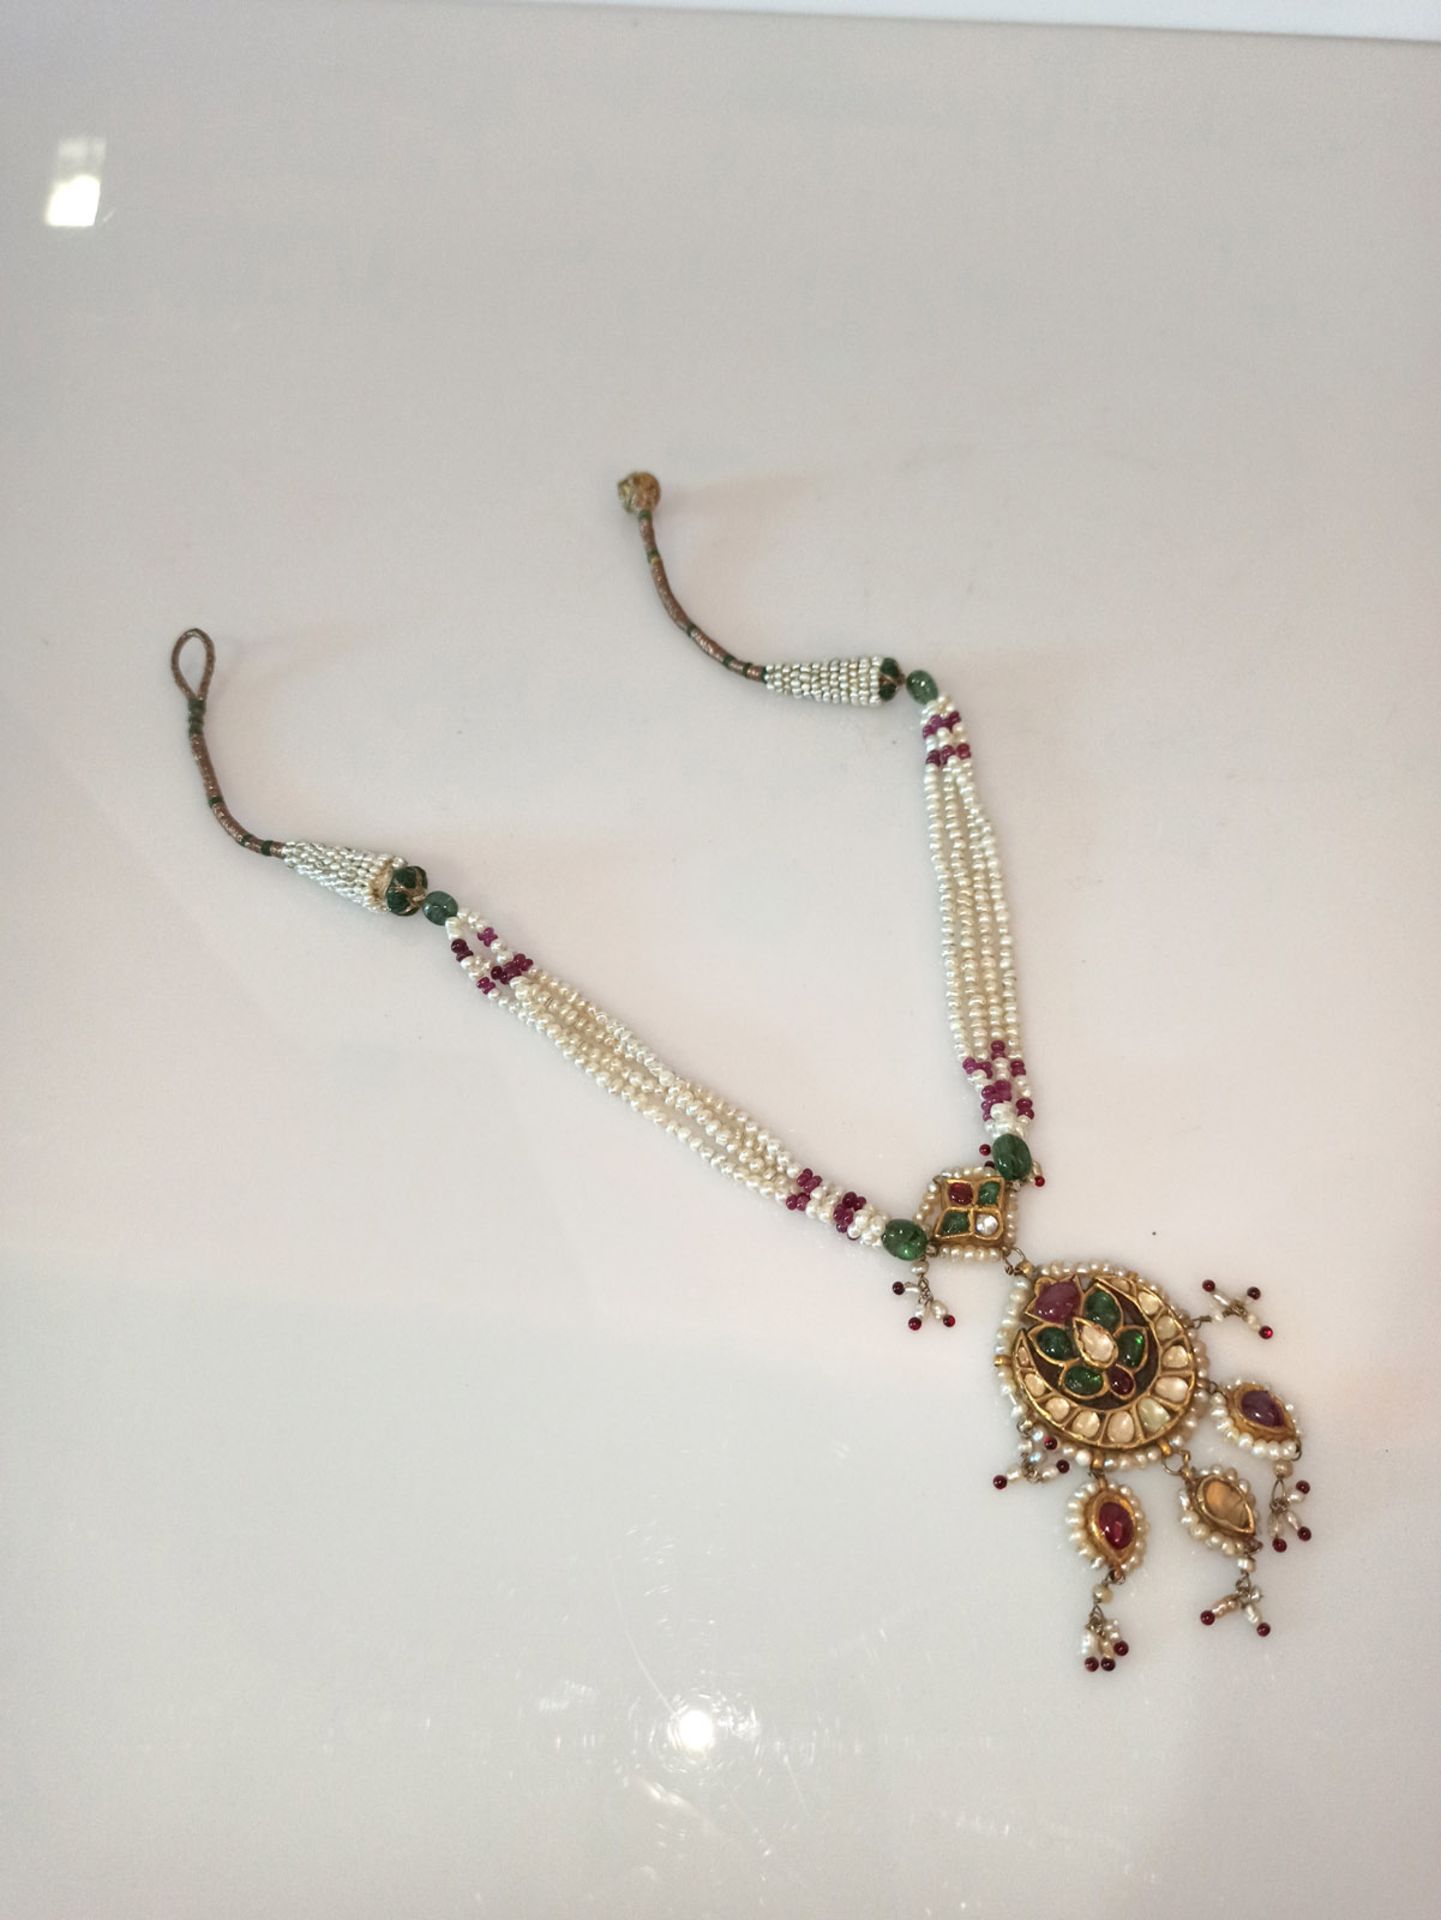 A FRESH-WATER PEARL NECKLACE IN MUGHAL STYLE - Image 2 of 4